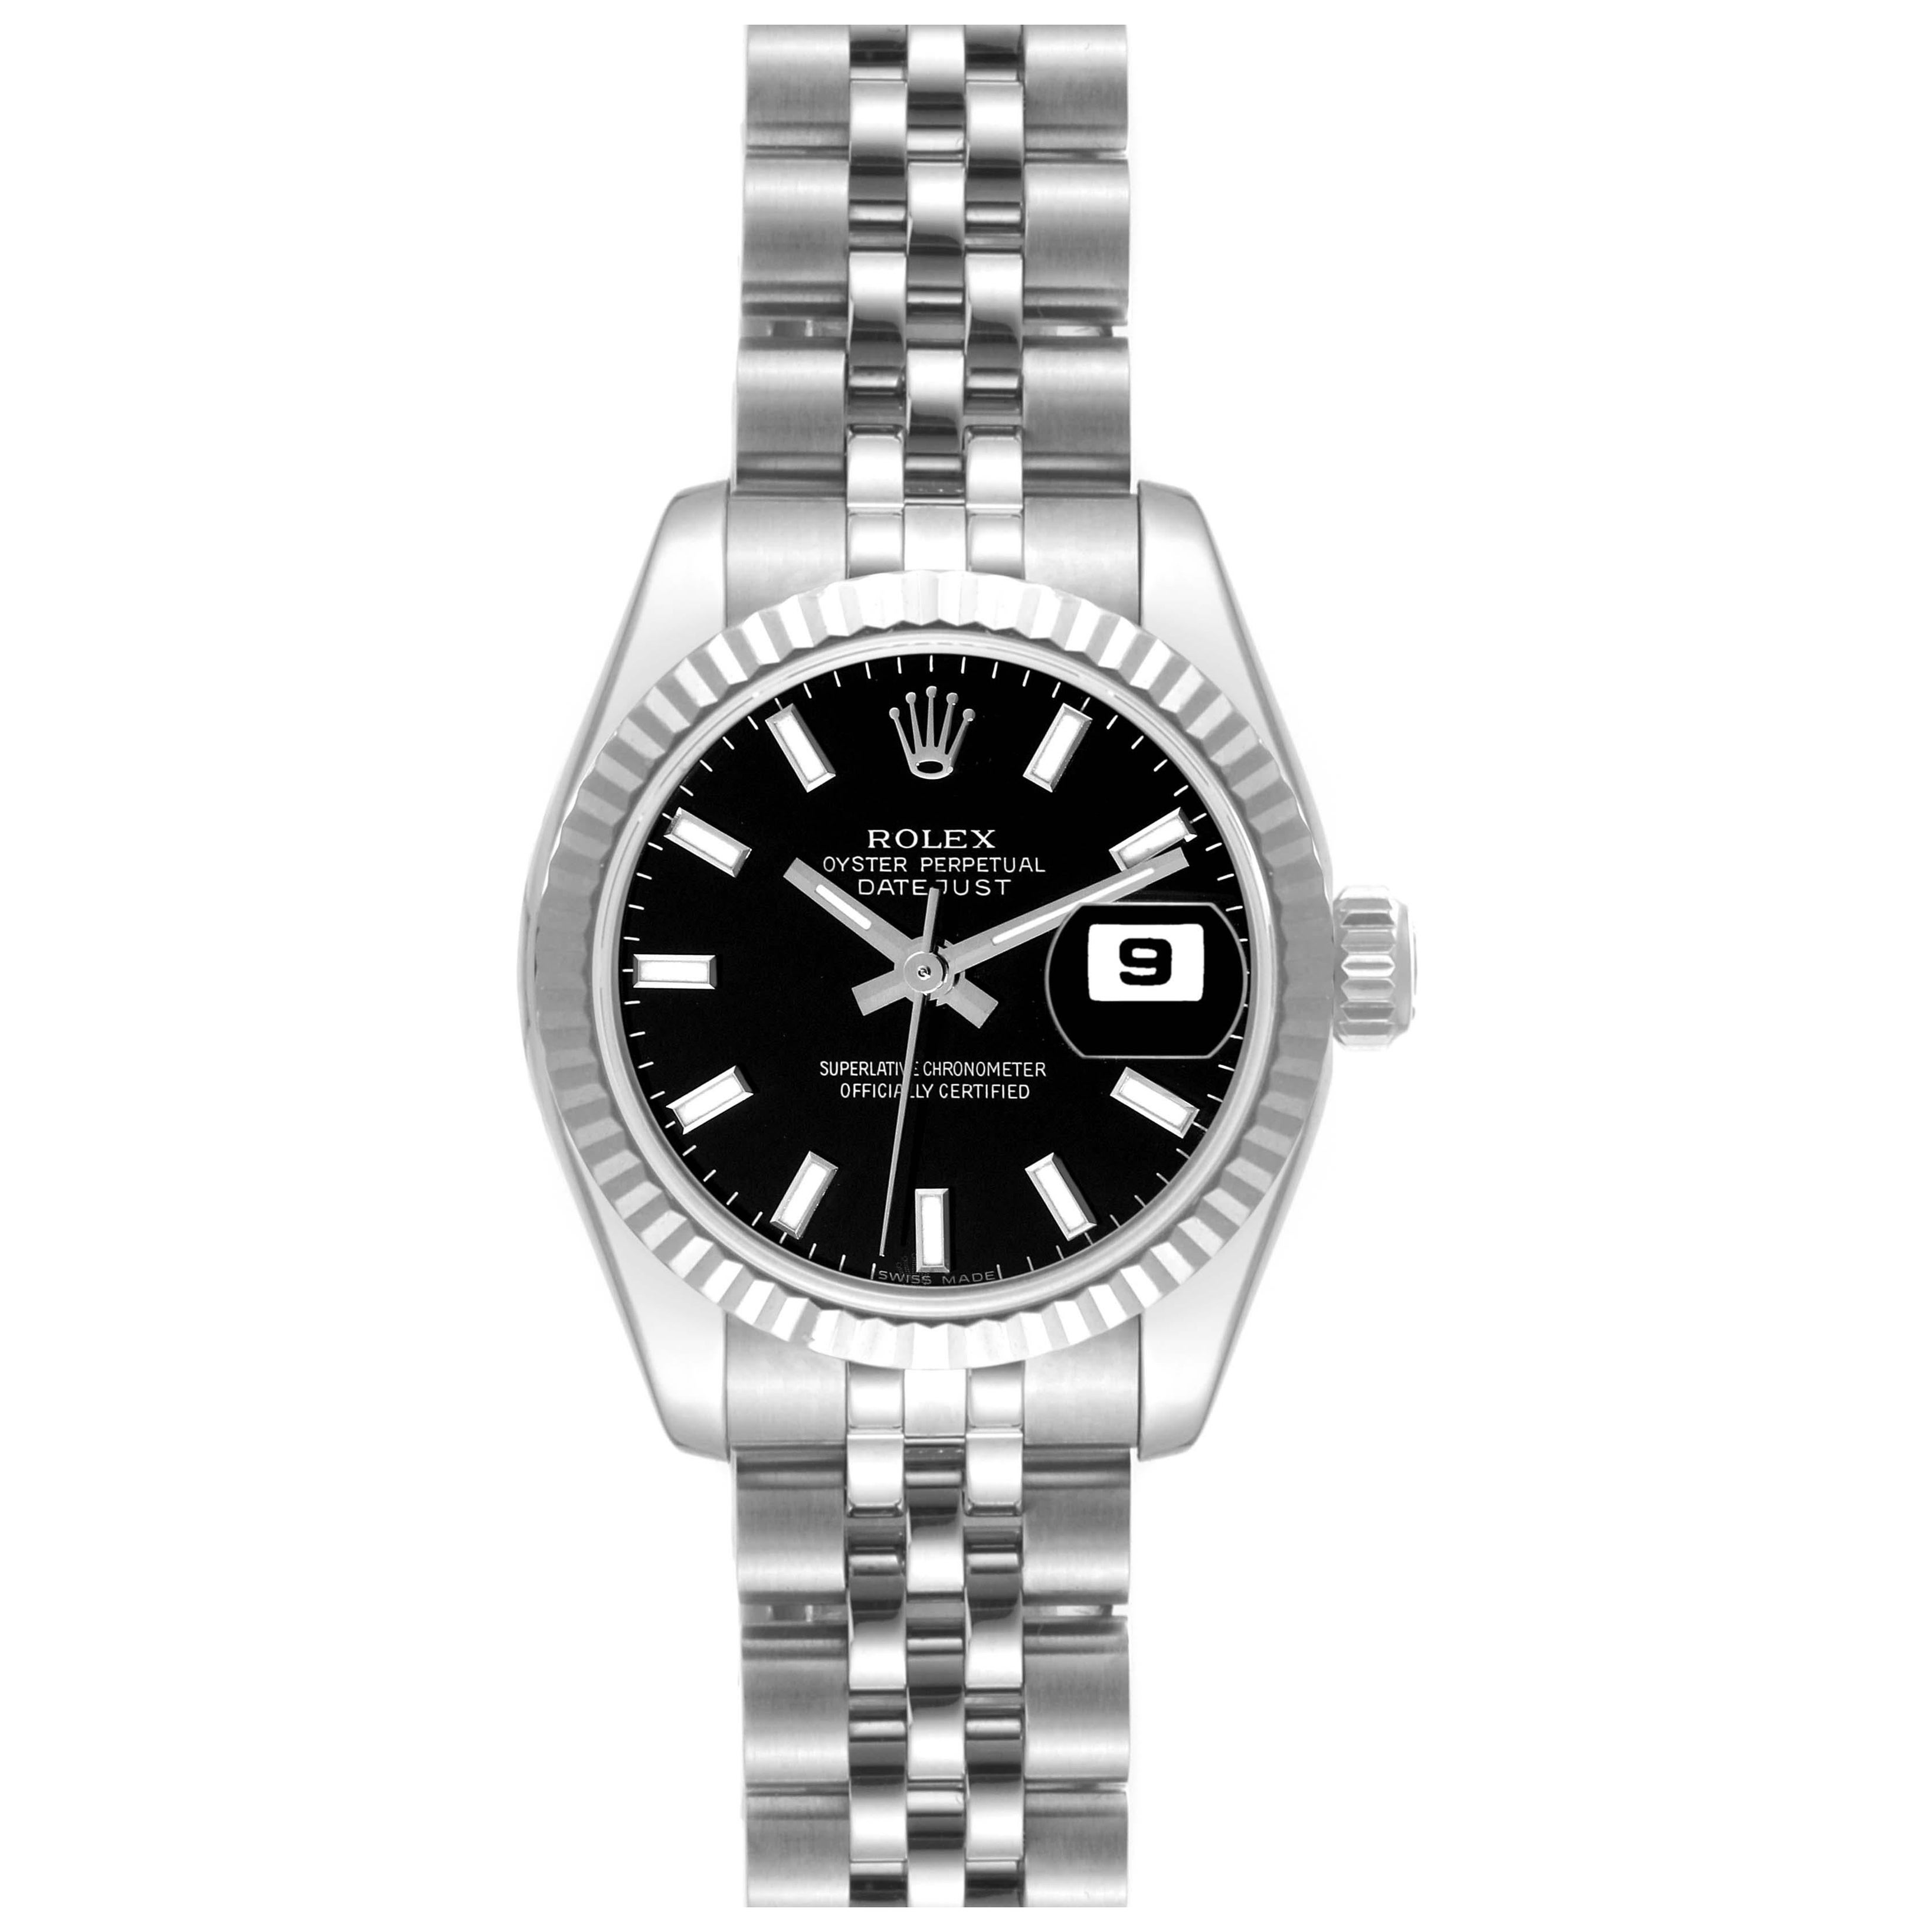 Rolex Datejust Steel White Gold Black Dial Ladies Watch 179174 Box Papers